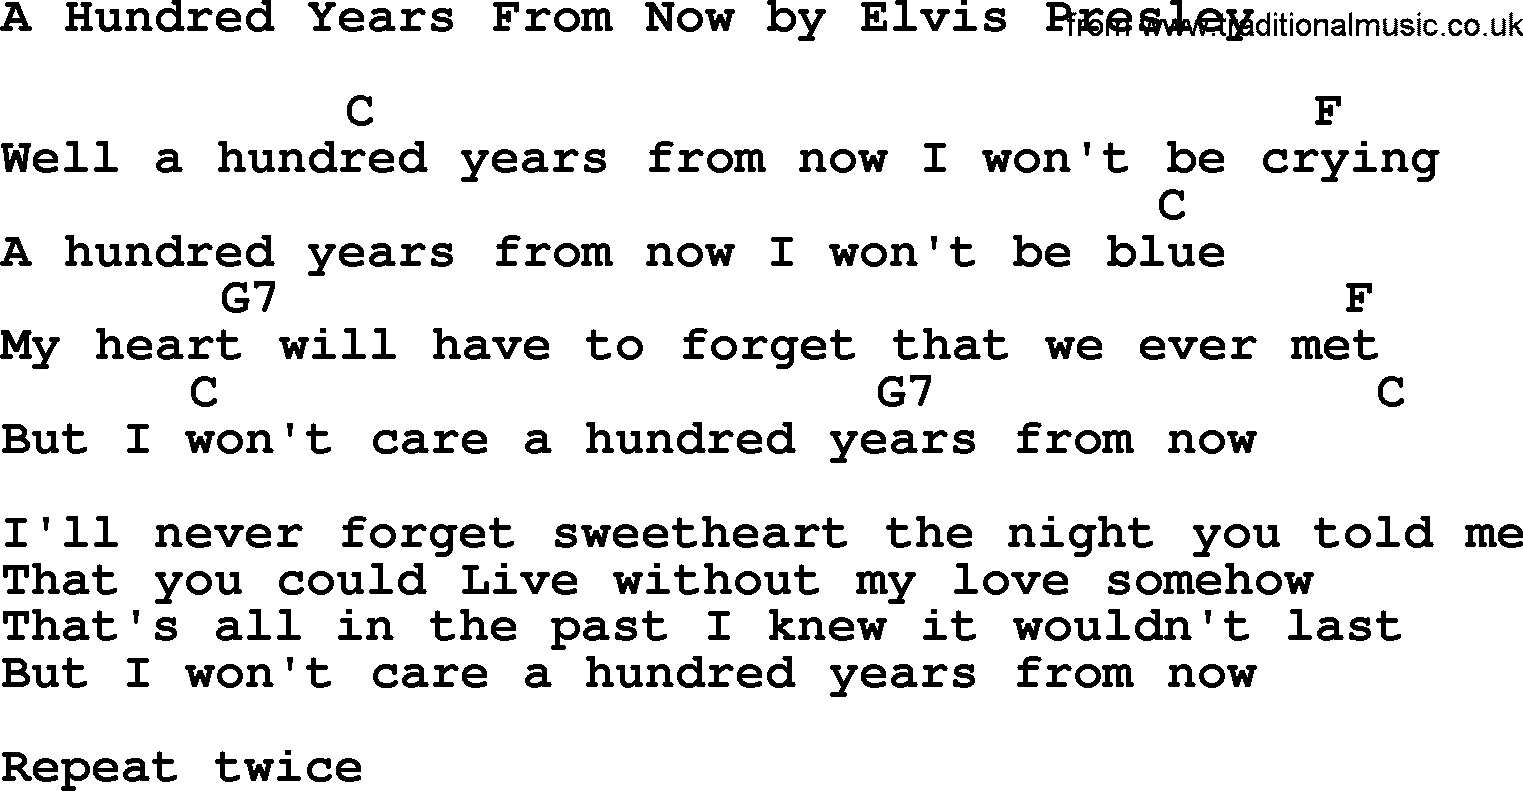 Elvis Presley song: A Hundred Years From Now, lyrics and chords